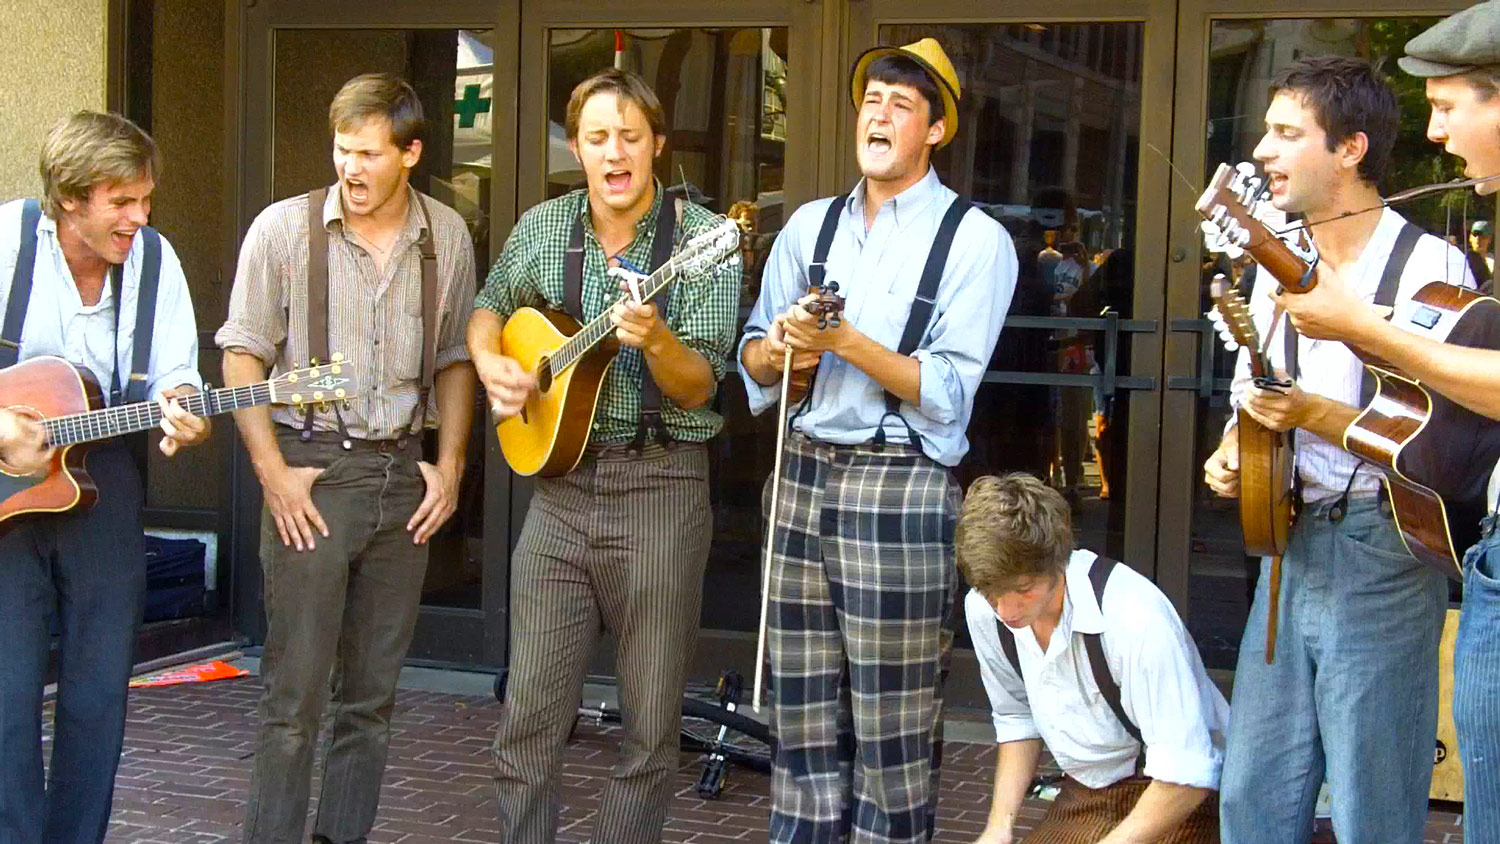 Tomb Nelson and The Stillwater Hobos perform an Irish medley at Bele Chere